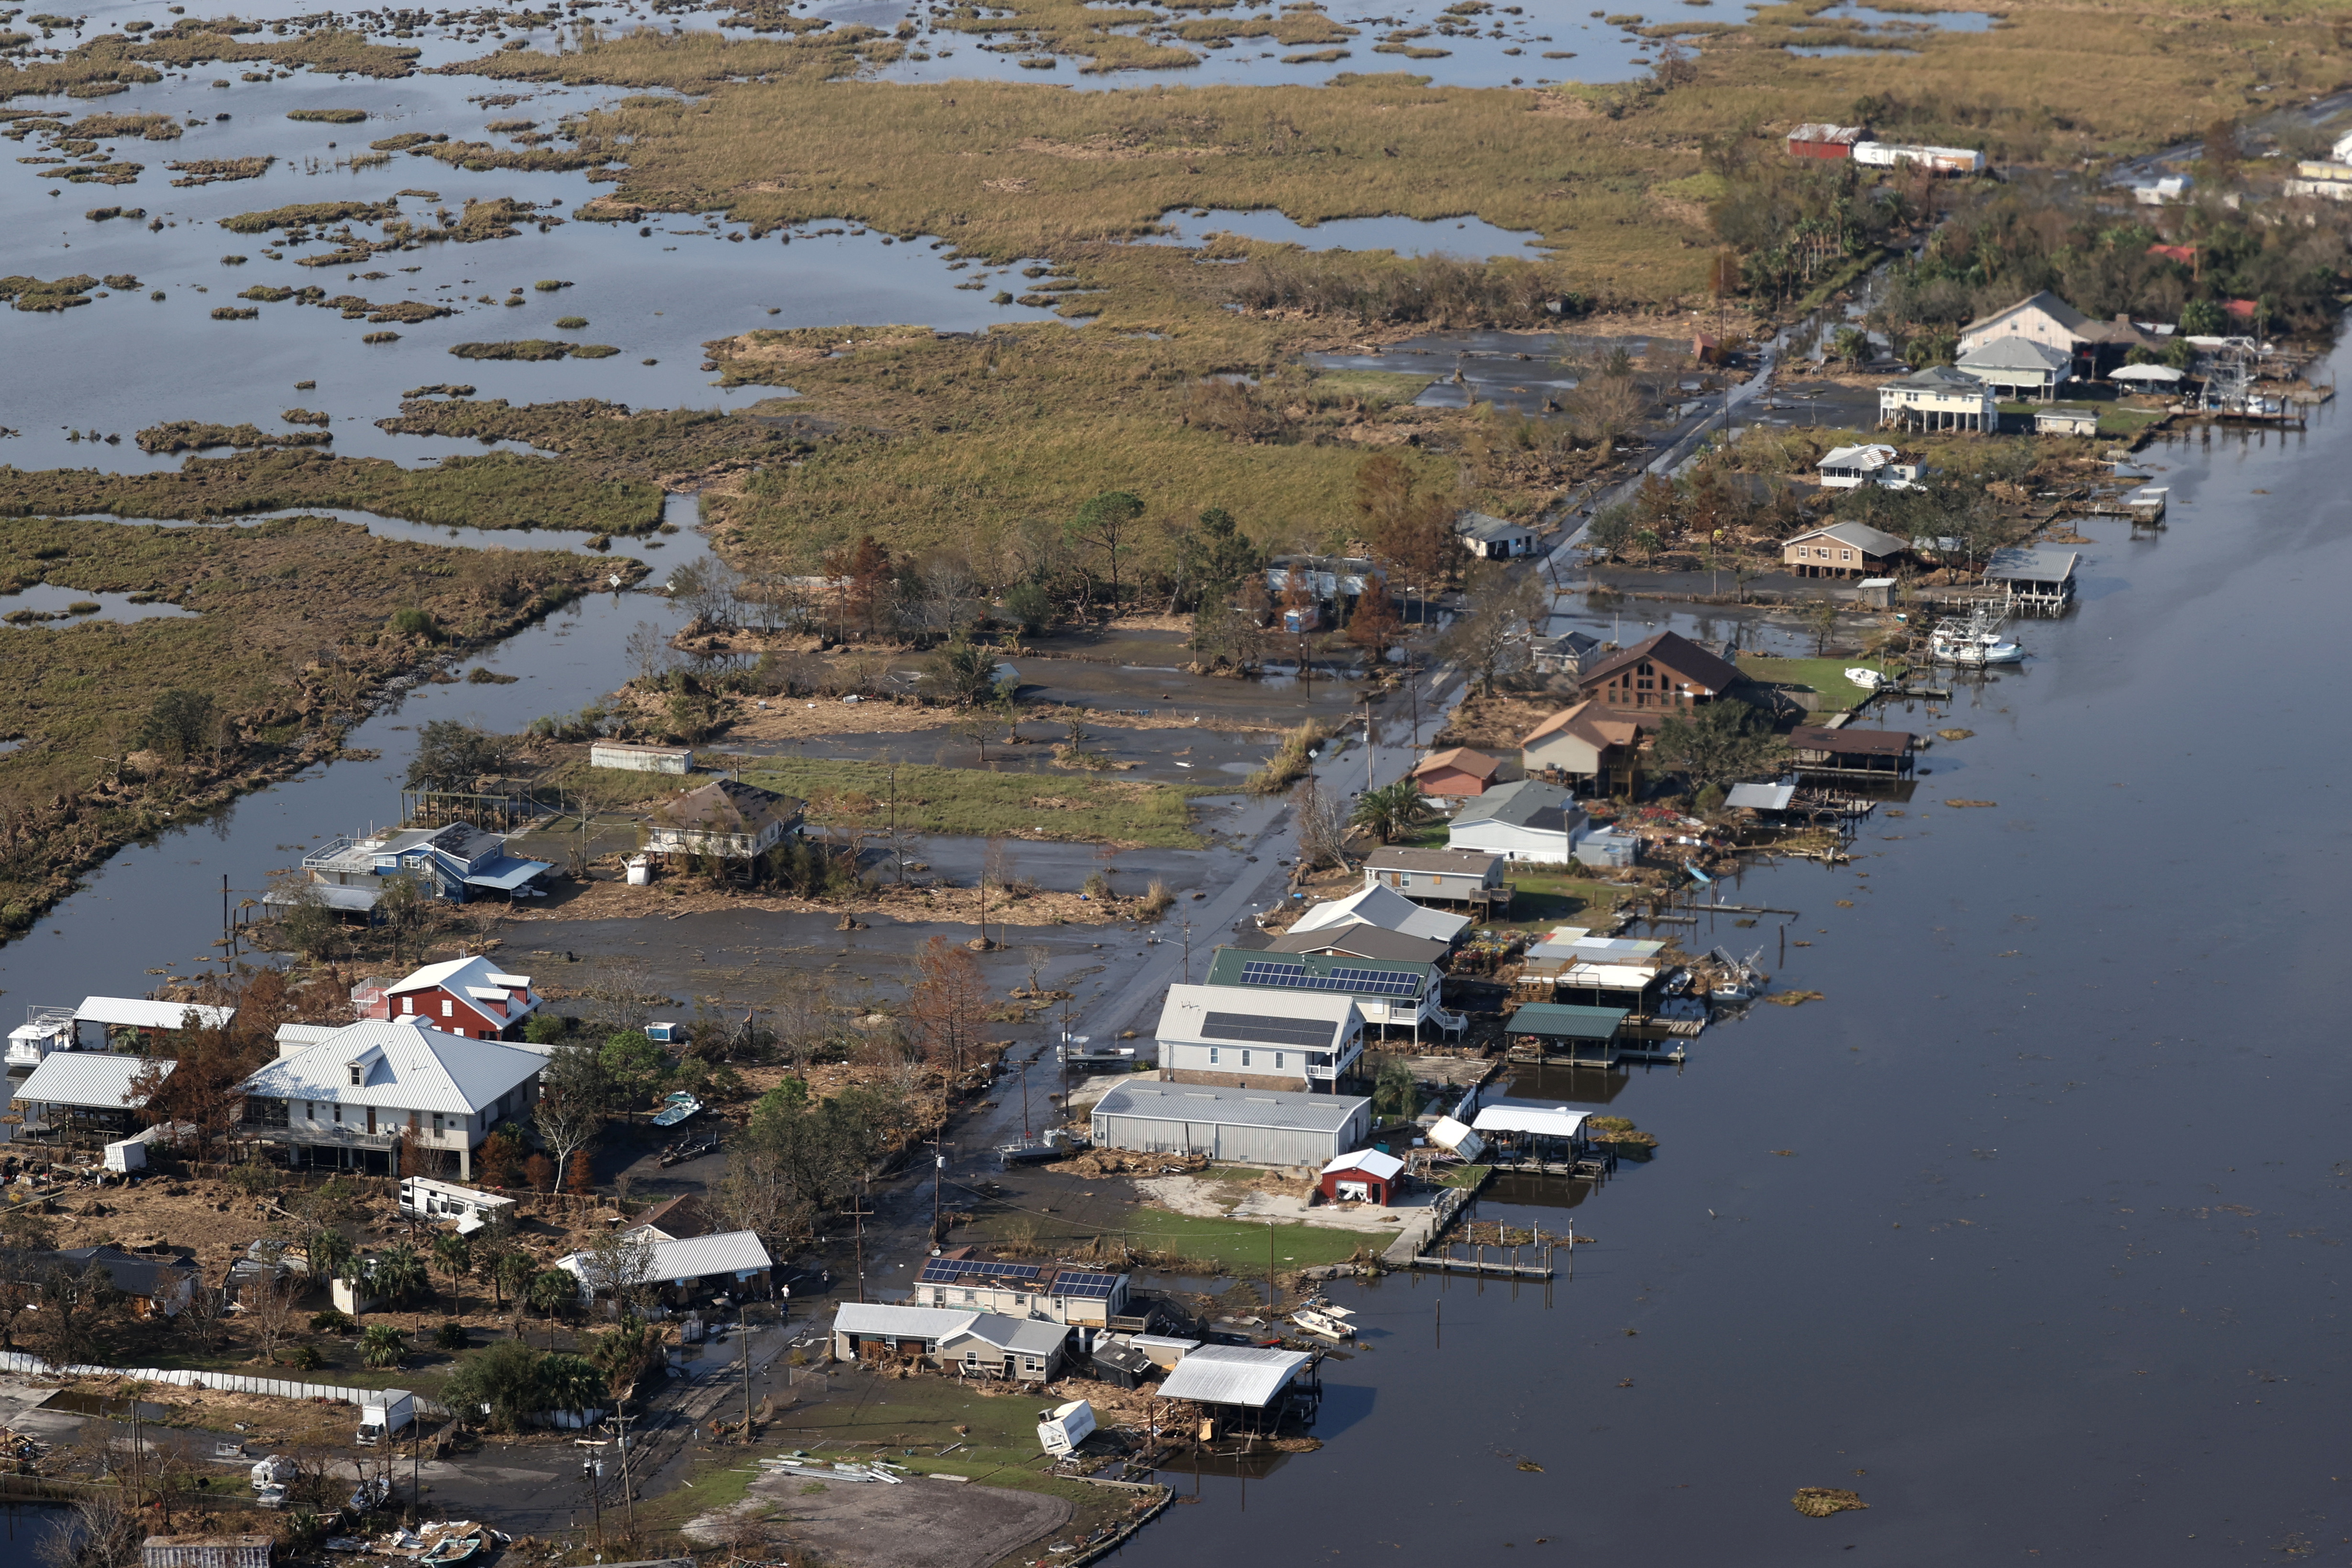 A view shows debris and buildings damaged from Hurricane Ida as U.S. President Joe Biden (not pictured) inspects the damage from Hurricane Ida from aboard the Marine One helicopter during an aerial tour of communities in Laffite, Grand Isle, Port Fourchon and Lafourche Parish, Louisiana, U.S. September 3, 2021. REUTERS/Jonathan Ernst/Pool